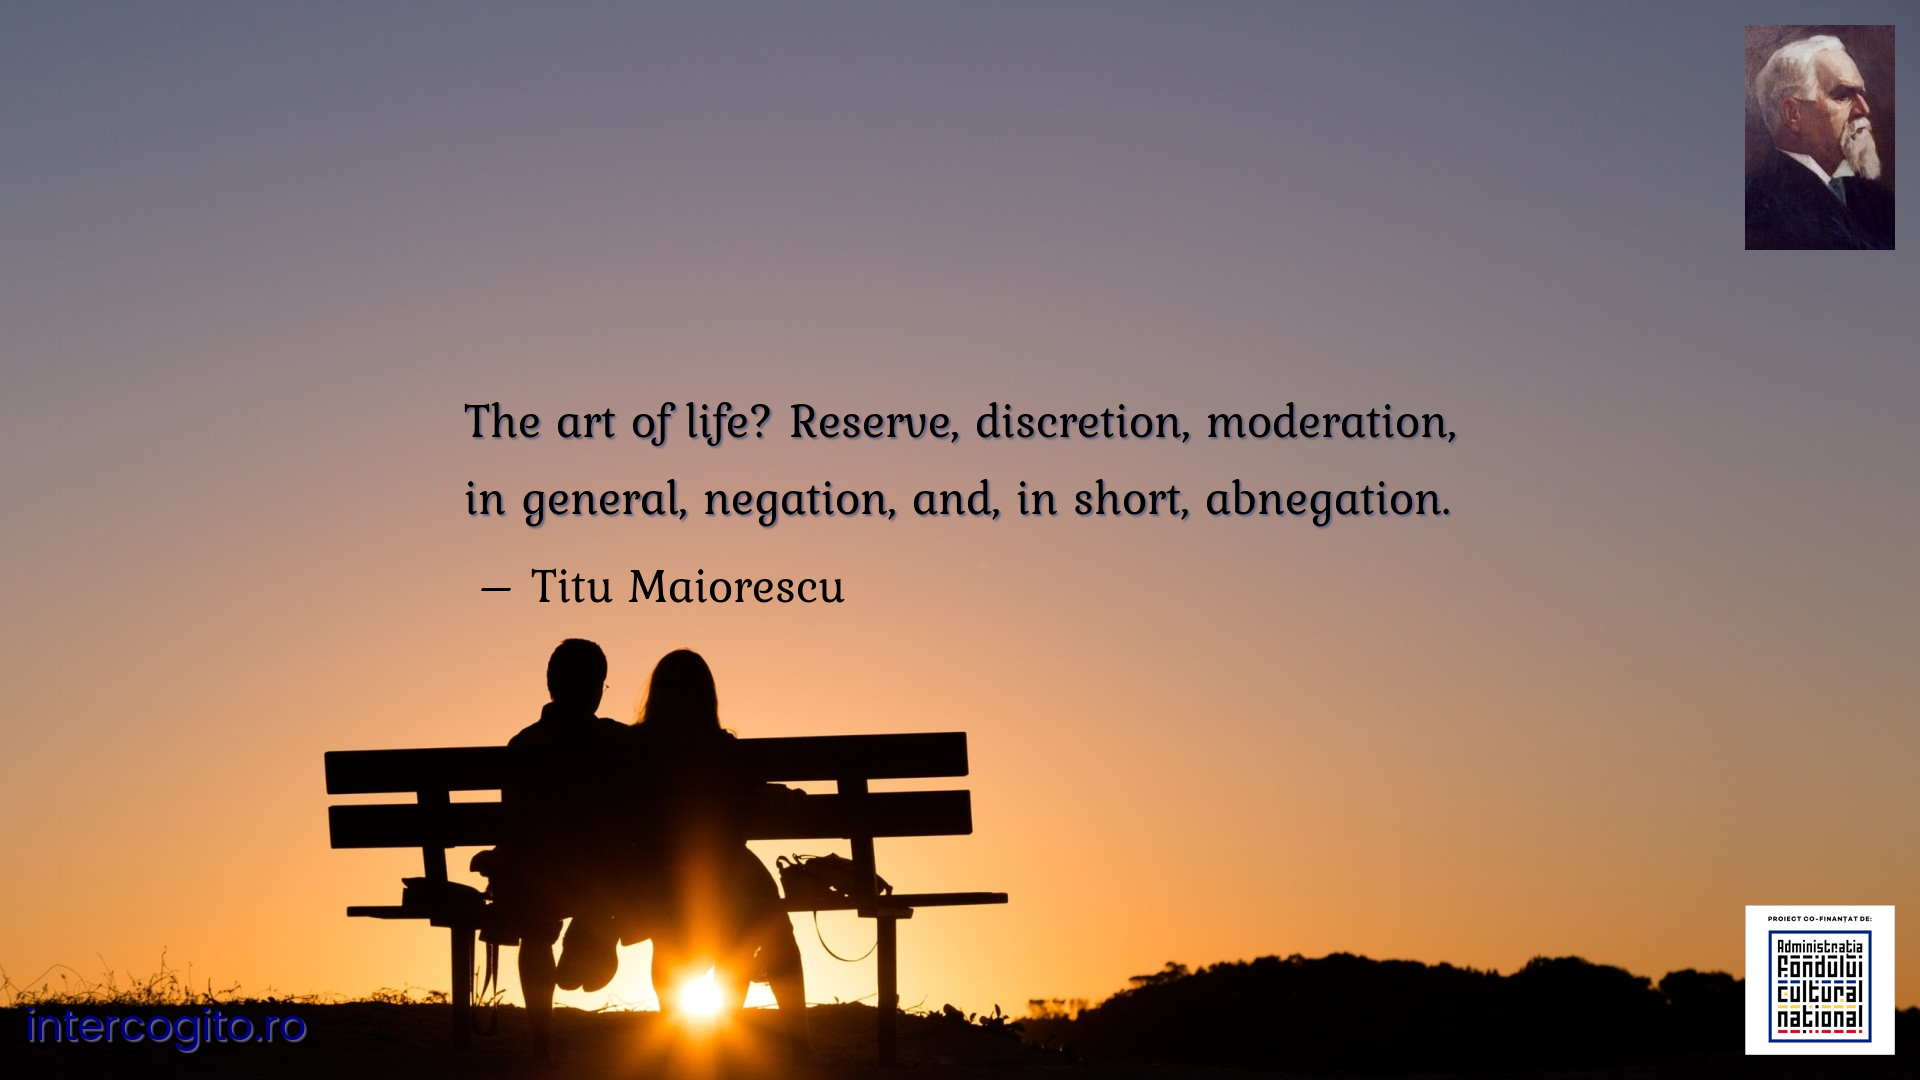 The art of life? Reserve, discretion, moderation, in general, negation, and, in short, abnegation.